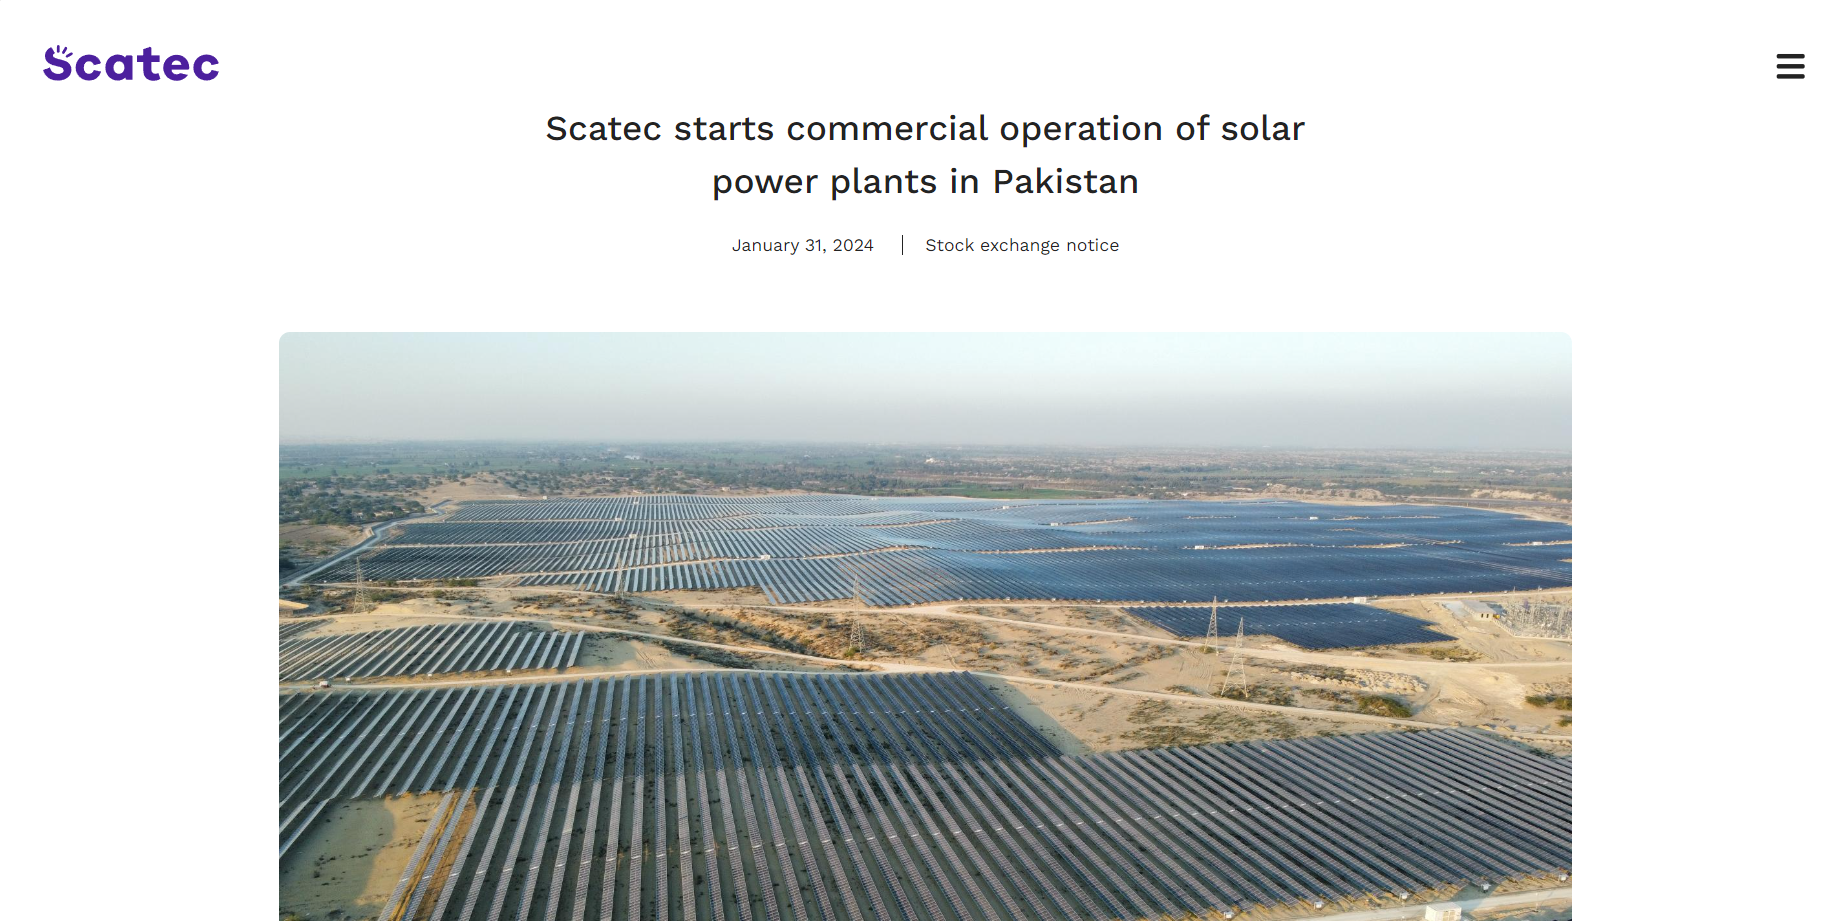 Scatec starts commercial operation of solar power plants in Pakistan